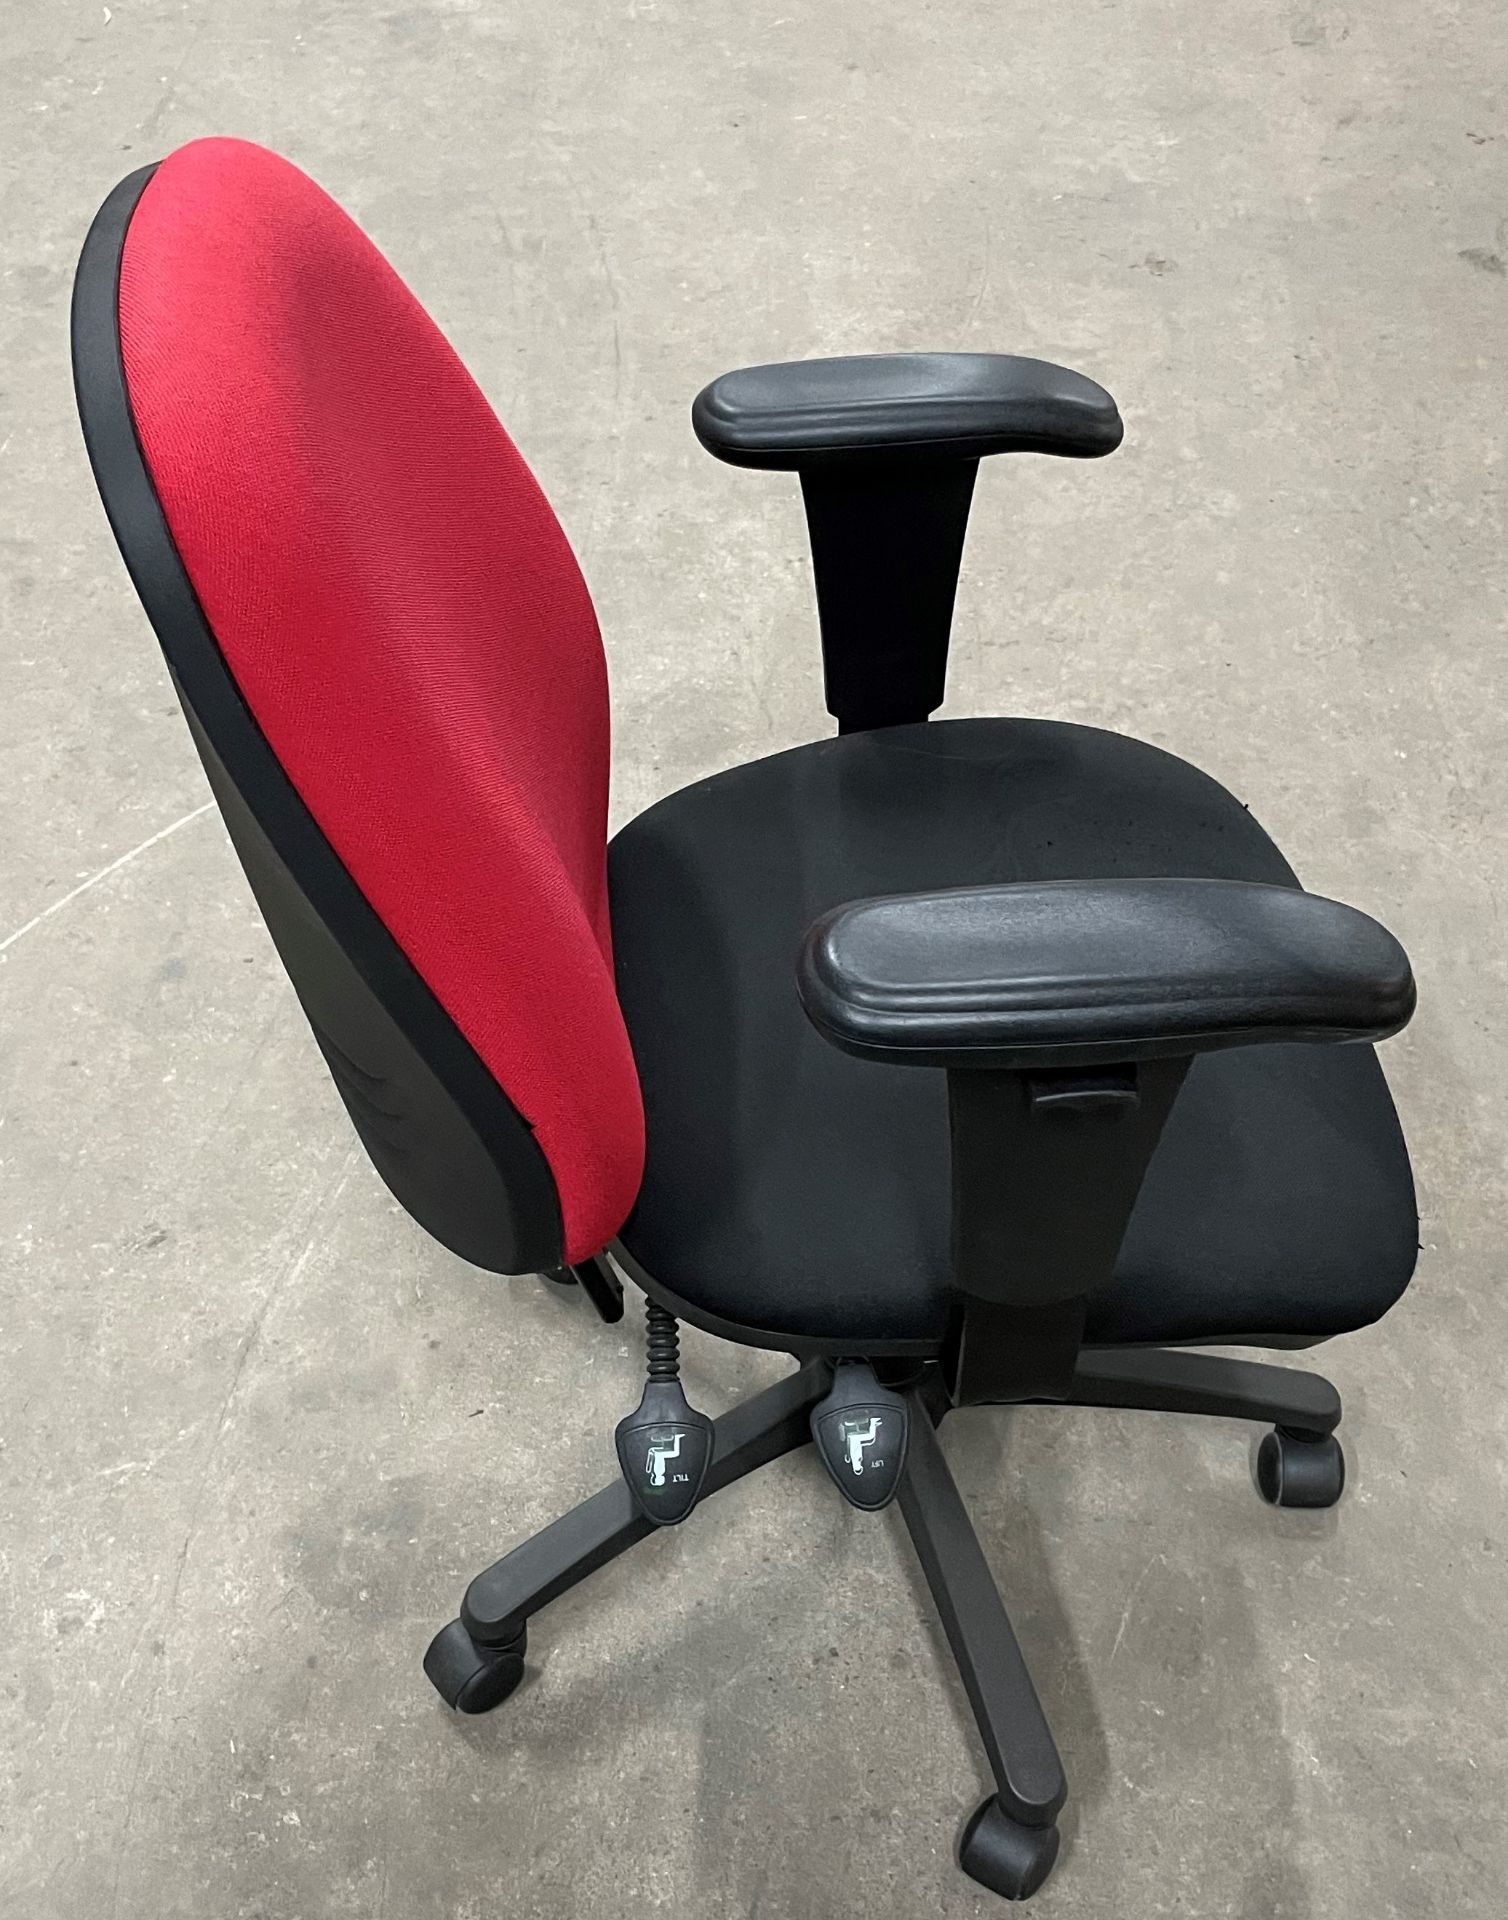 5 x Fabric Operator Chairs w/Arm Rests and Five Star Wheel Base - Image 2 of 4